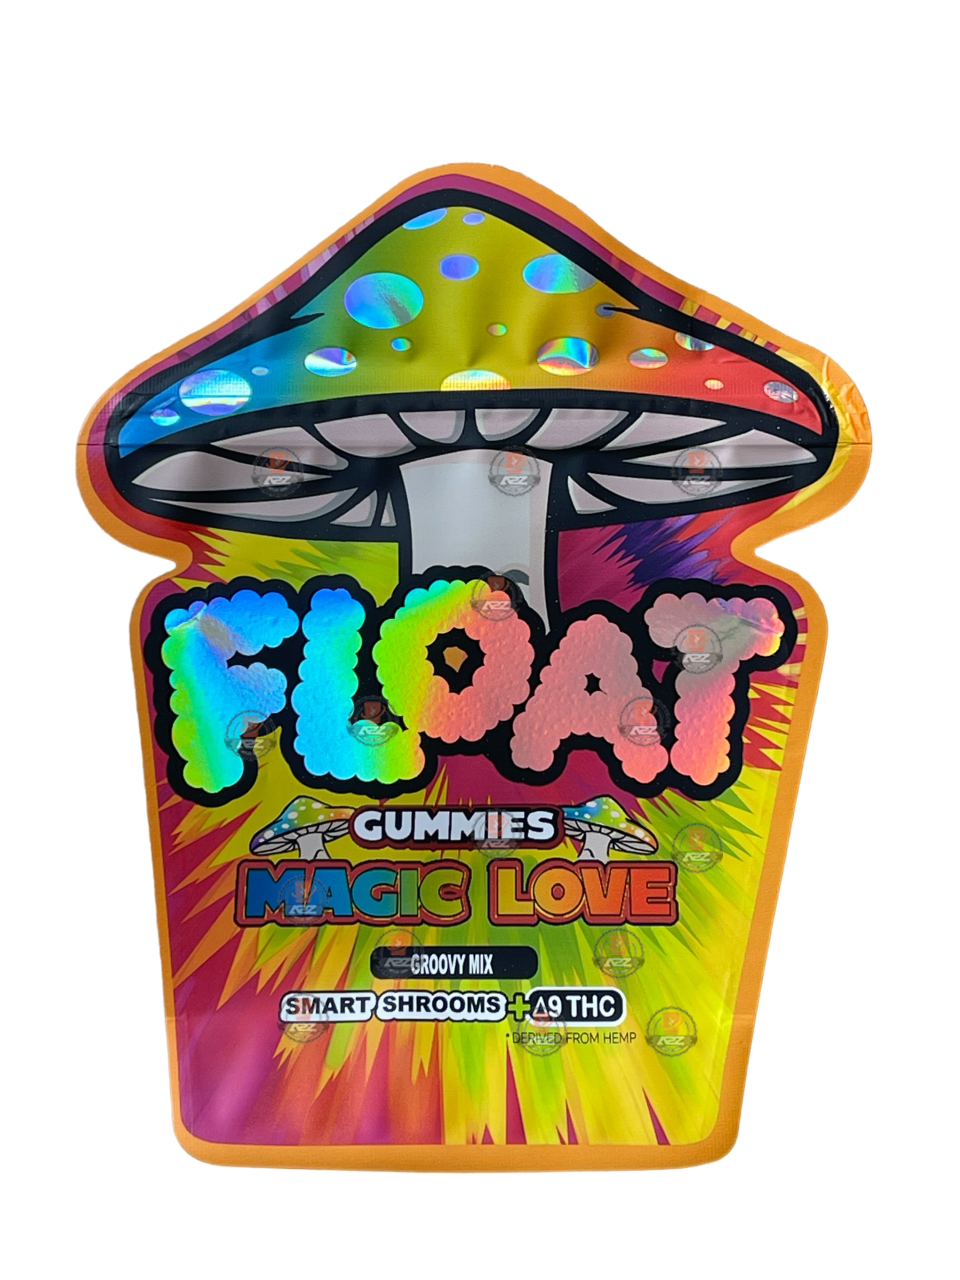 Float Gummies Magic Love Mylar bags 3.5G Holographic Packaging Only